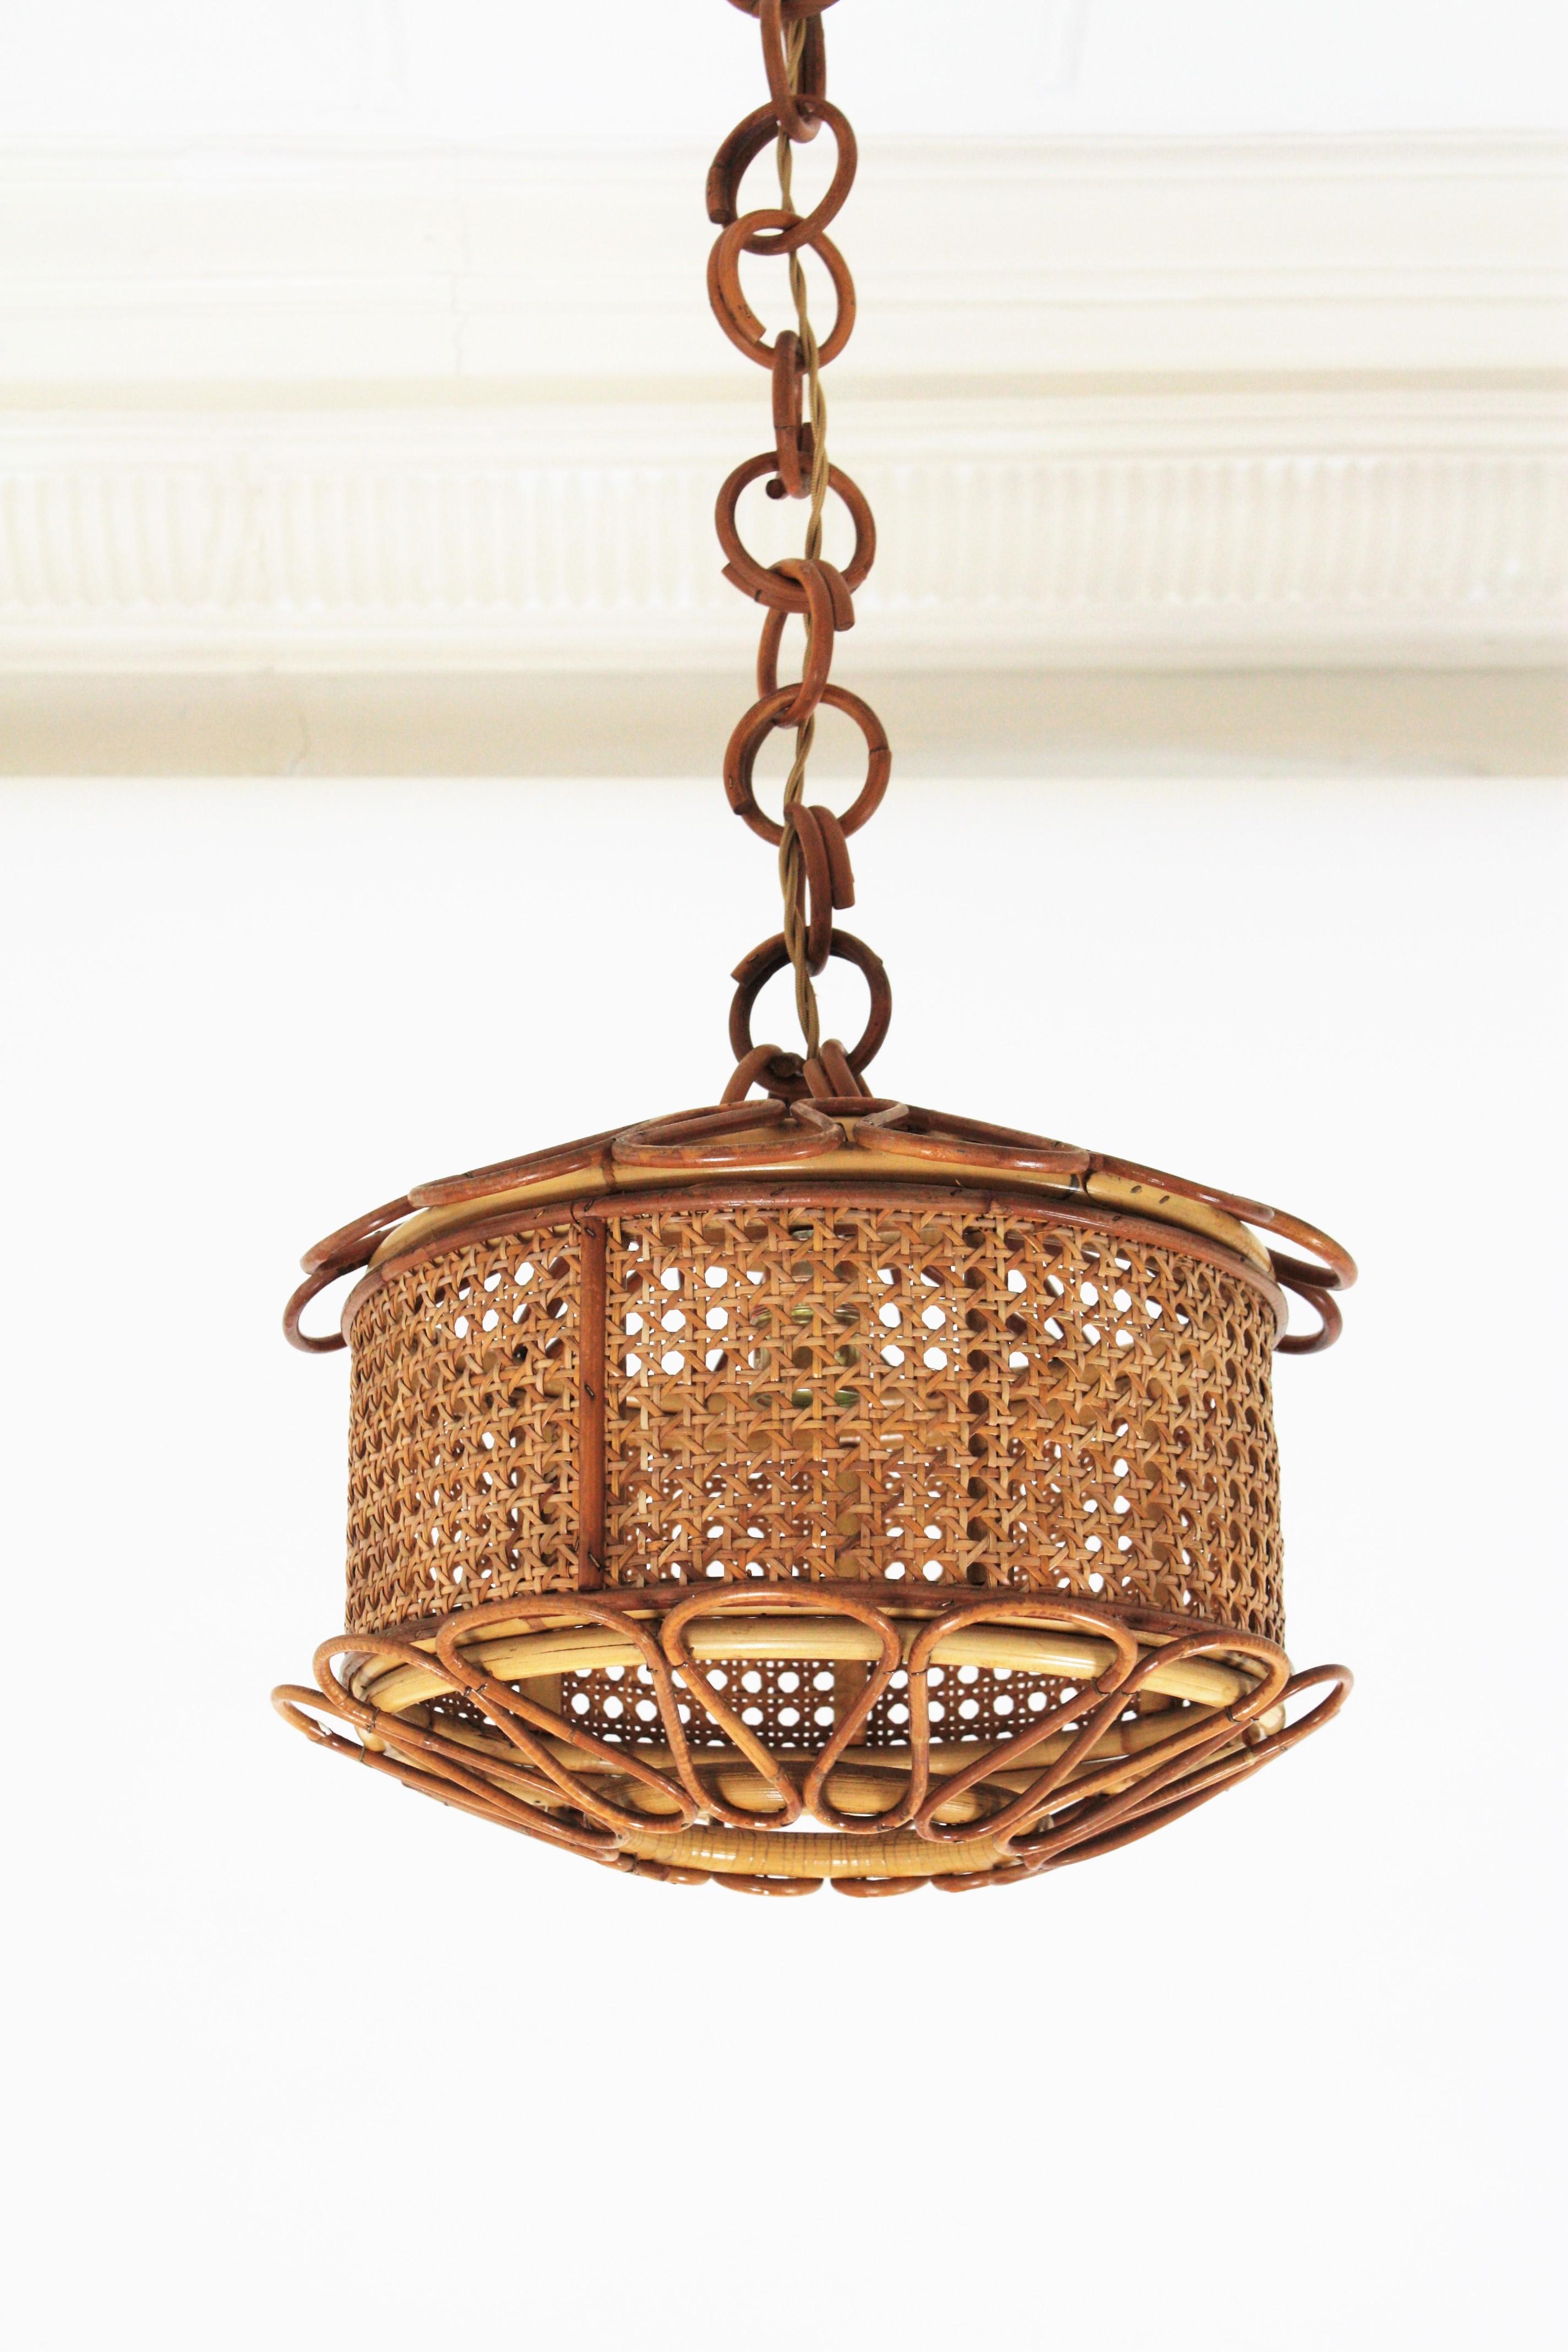 Beautiful Mid-Century Modern woven wicker wire and rattan pendant lamp / lantern. Italy, 1950s.
The woven wicker cylindrical shade of this lamp is accented by handcrafted rattan details as petals at the bottom and at the top. It hangs from a chain